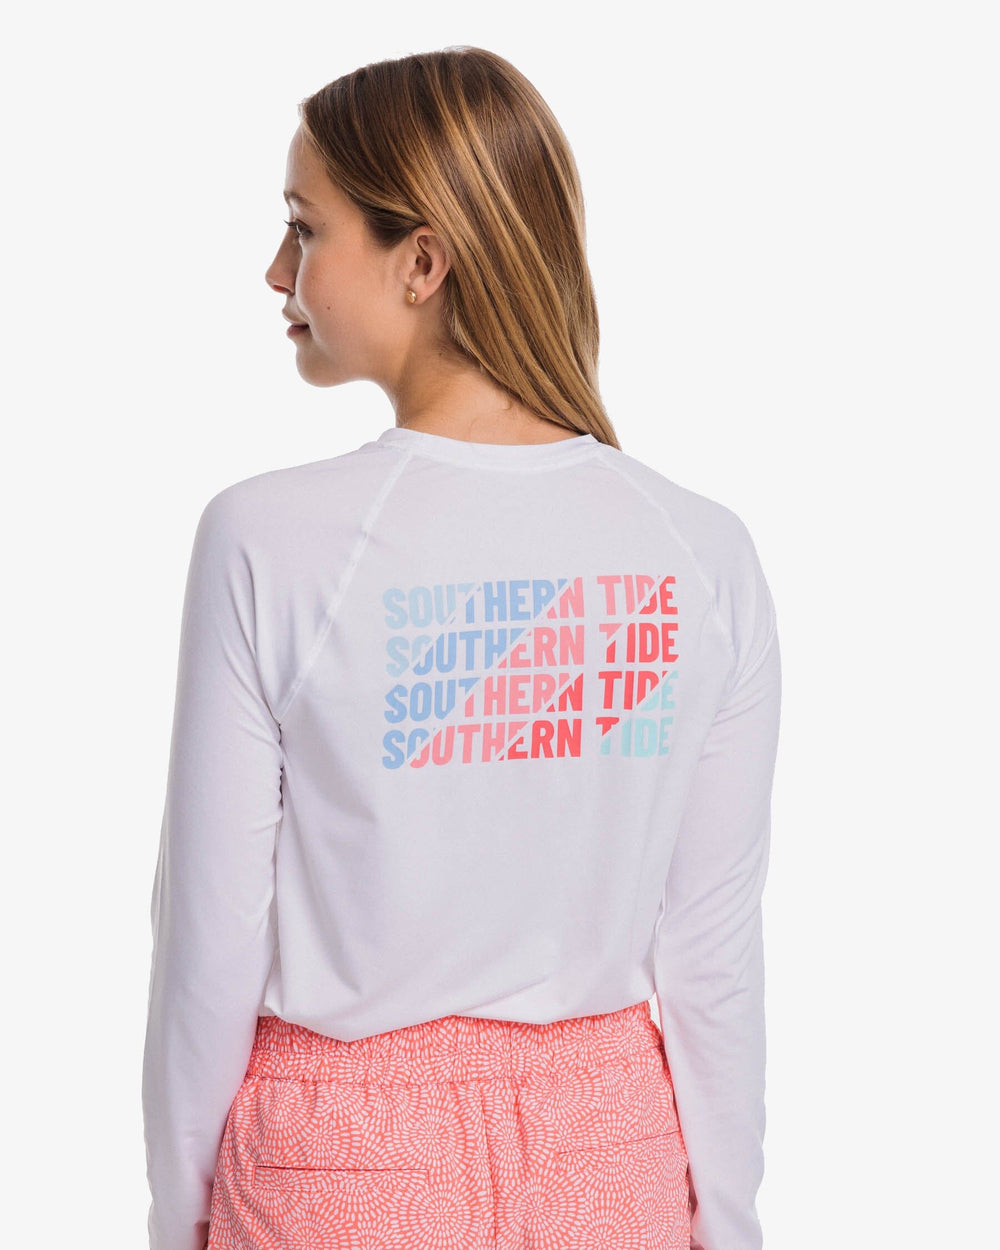 The back view of the Southern Tide Long Sleeve Southern Tide Slice Performance T-Shirt by Southern Tide - Classic White